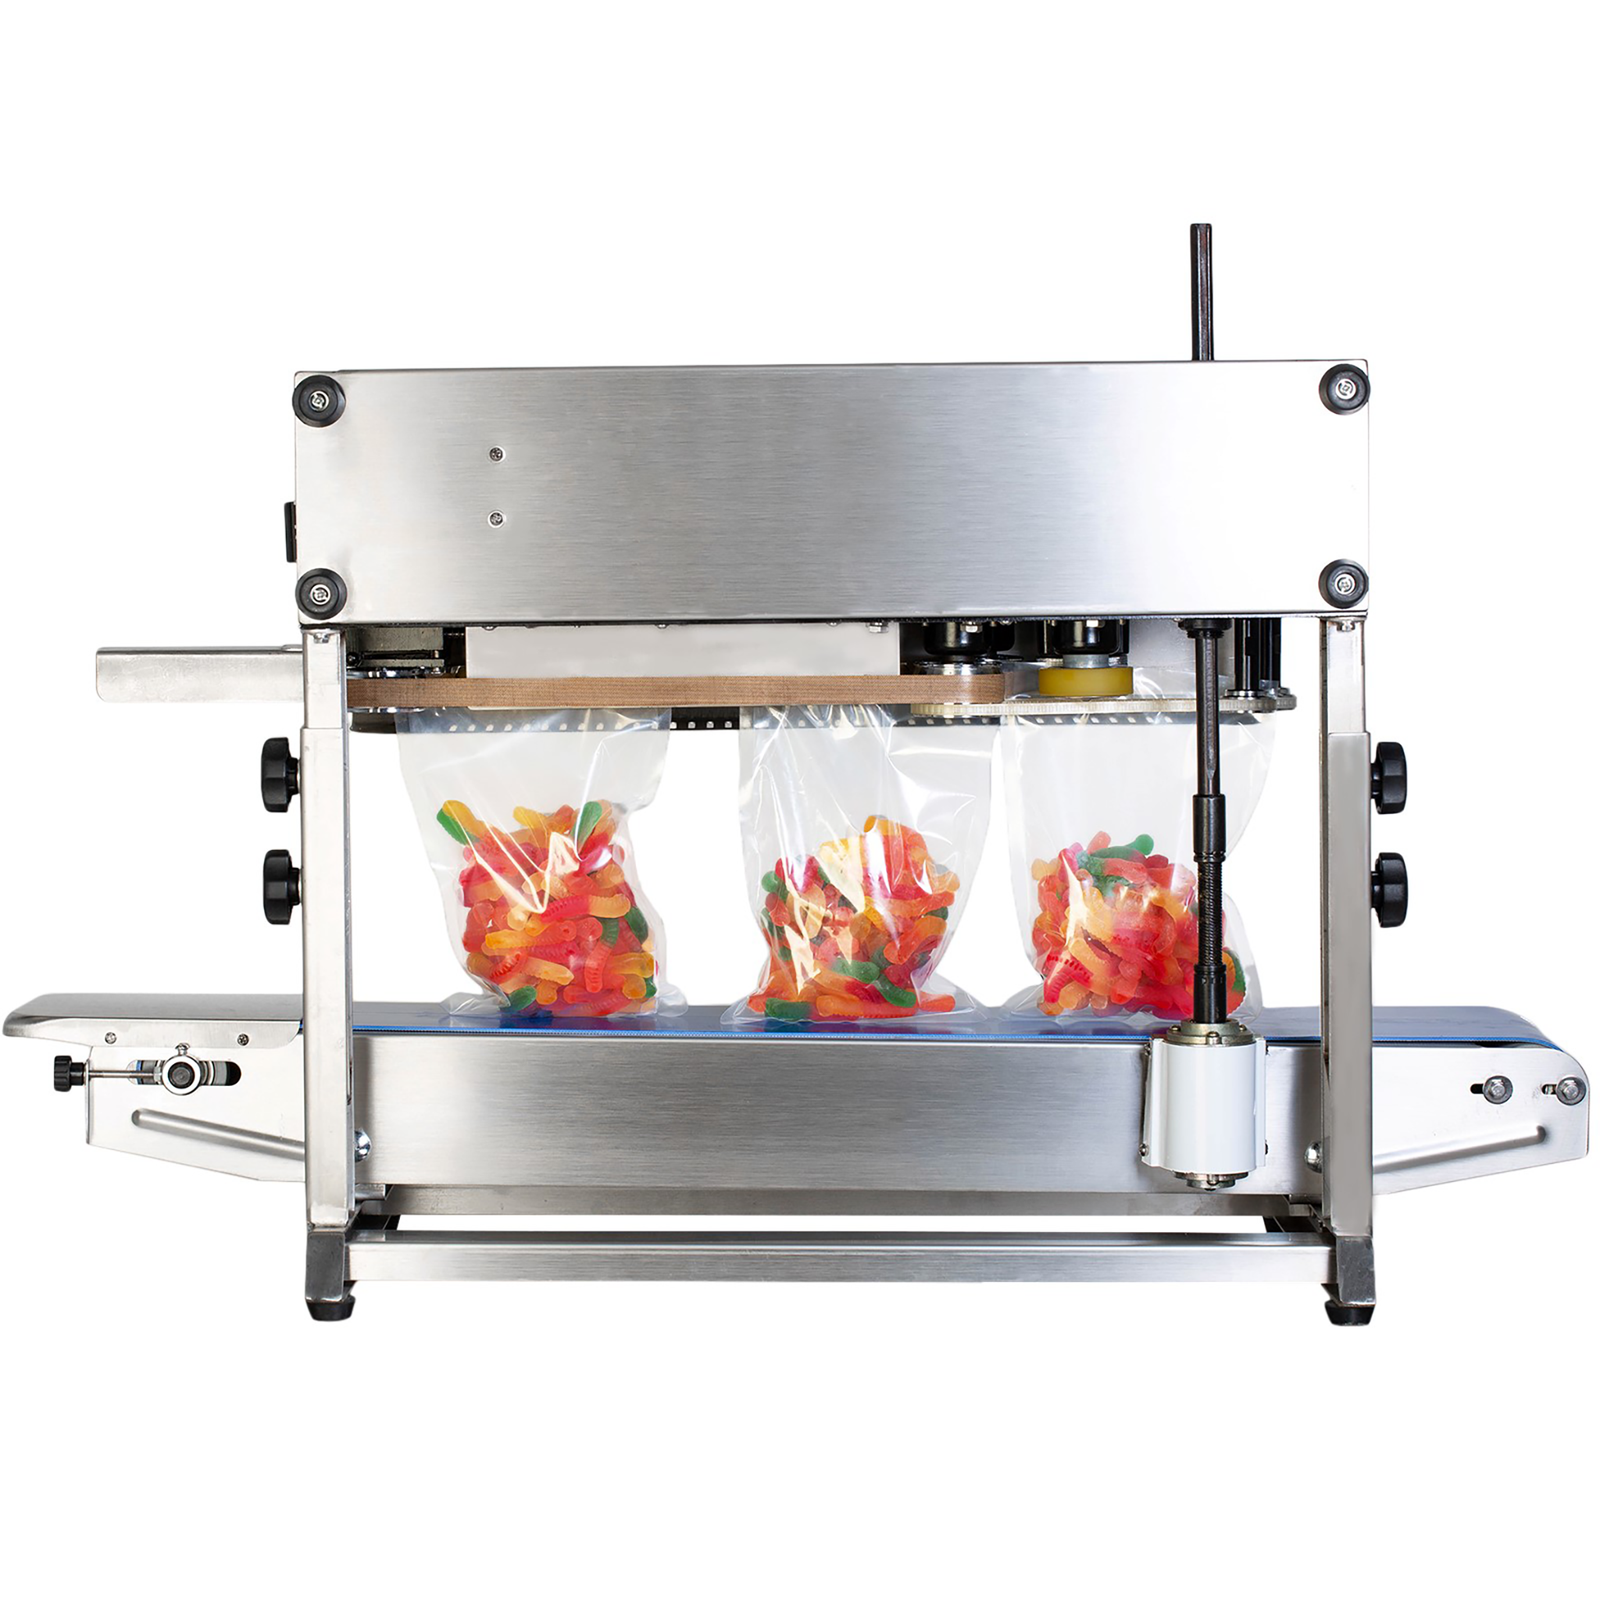 back view of stainless steel band sealing JORES TECHNOLOGIES® machine sealing clear bags filled with vibrant multi-colored gummy worms.